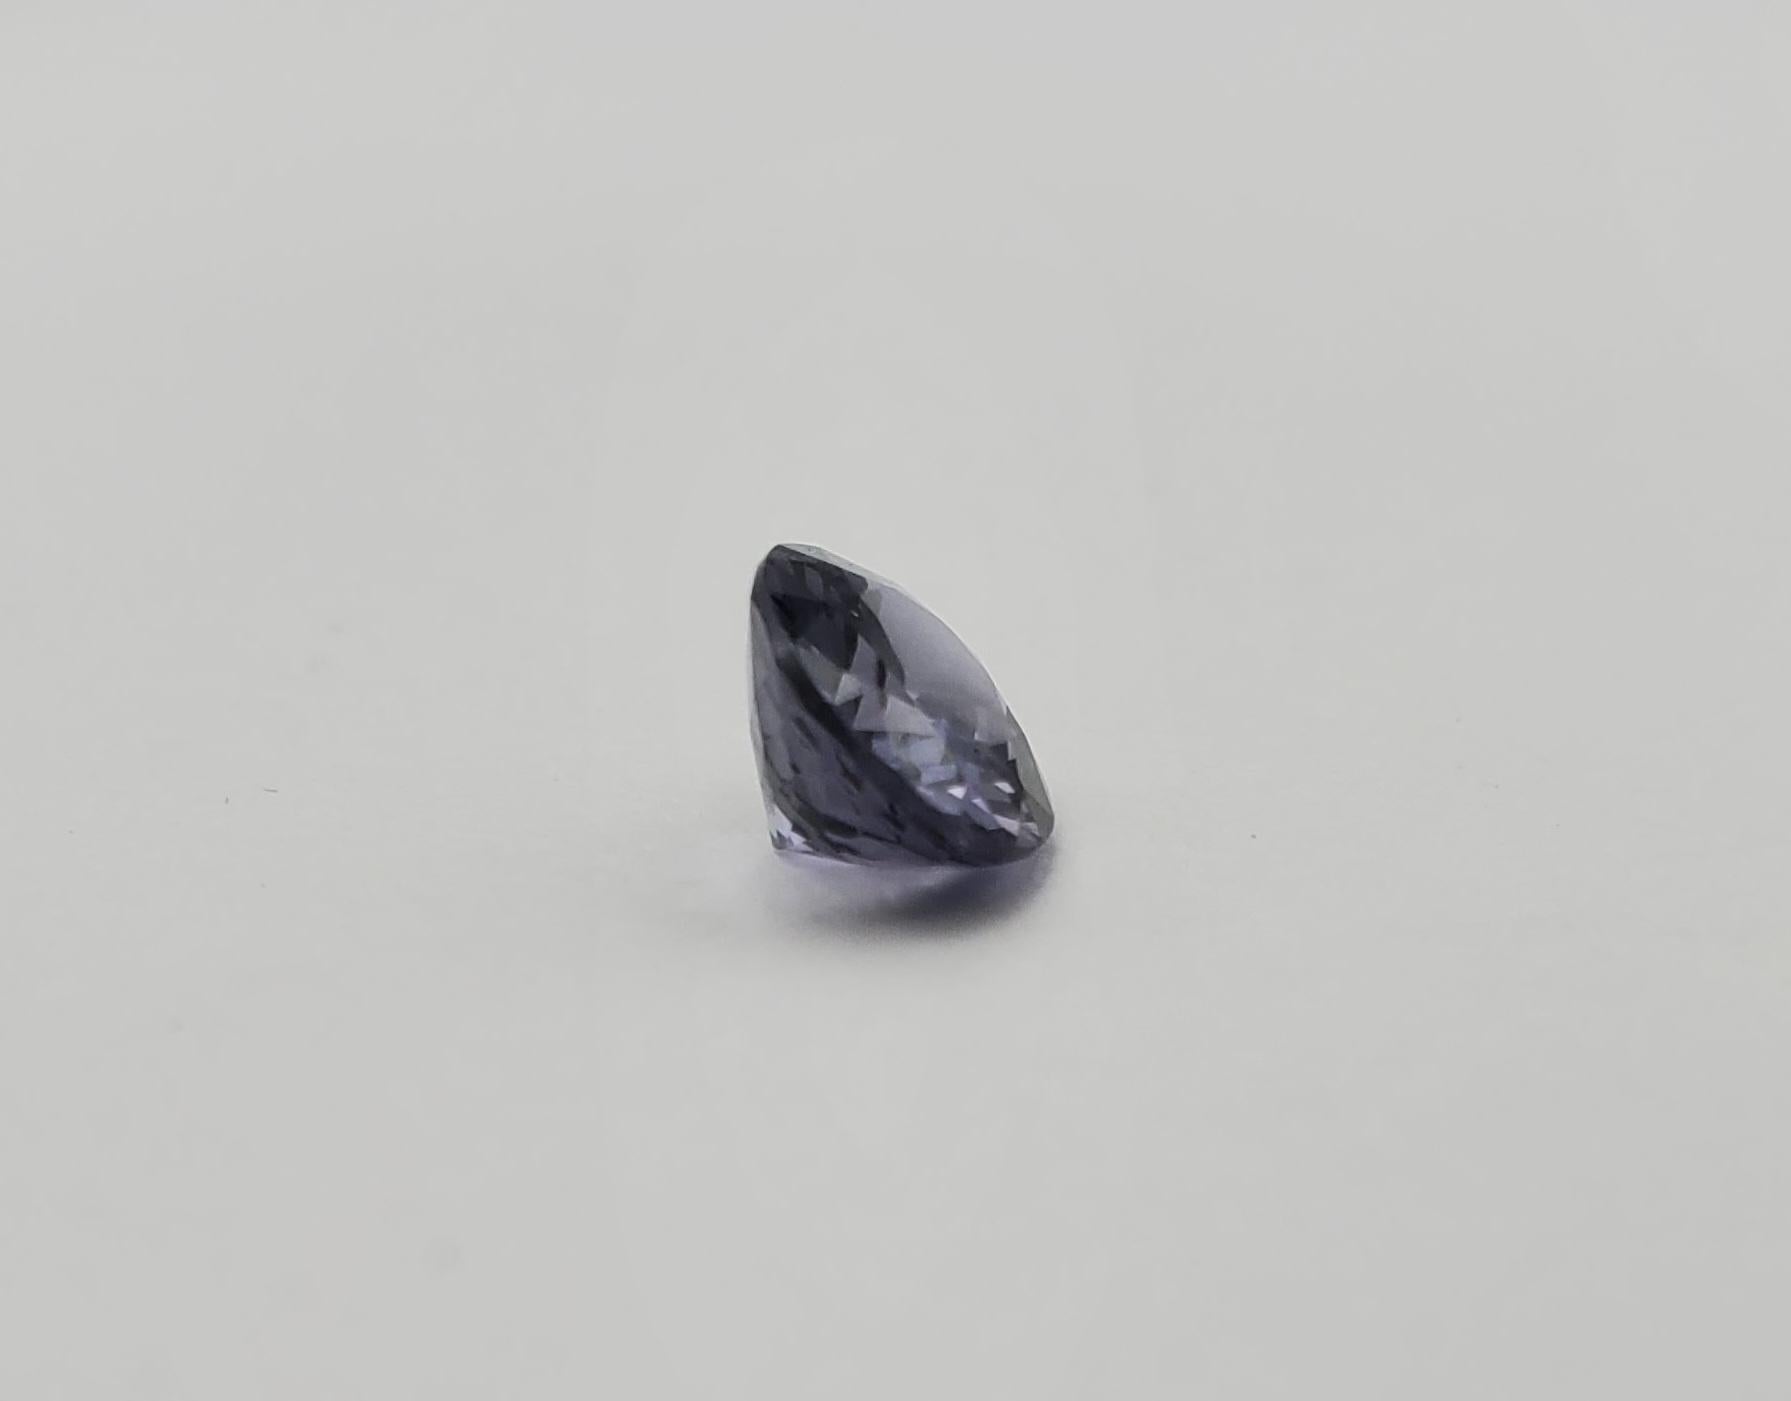 Experience our beautiful and rare 1.71 carat natural oval-shaped platinum spinel. This gemstone is a reflection of nature's sublime artistry with its flashing purple-blue and gray hues. With its impressive precision-cut dimensions of 8.50 x 6.79 x